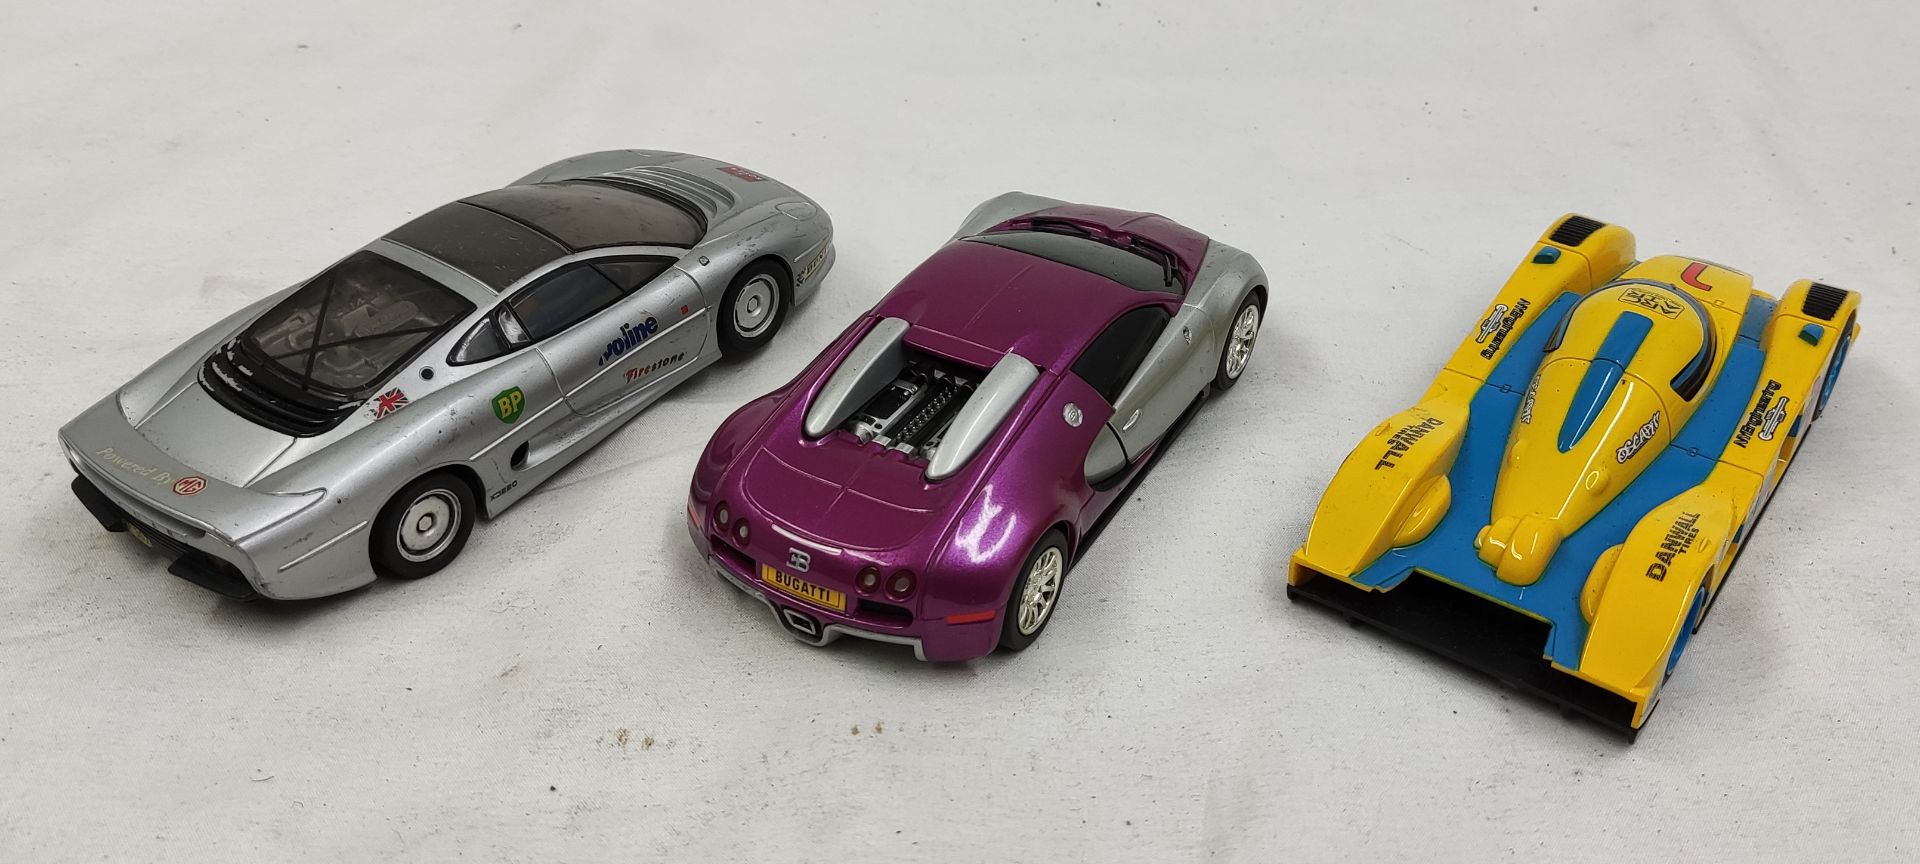 3 x Scalextric Cars - Includes Jaguar XJ220, Bugatti and LM Cars - Tested and Working - Used - CL444 - Image 7 of 14